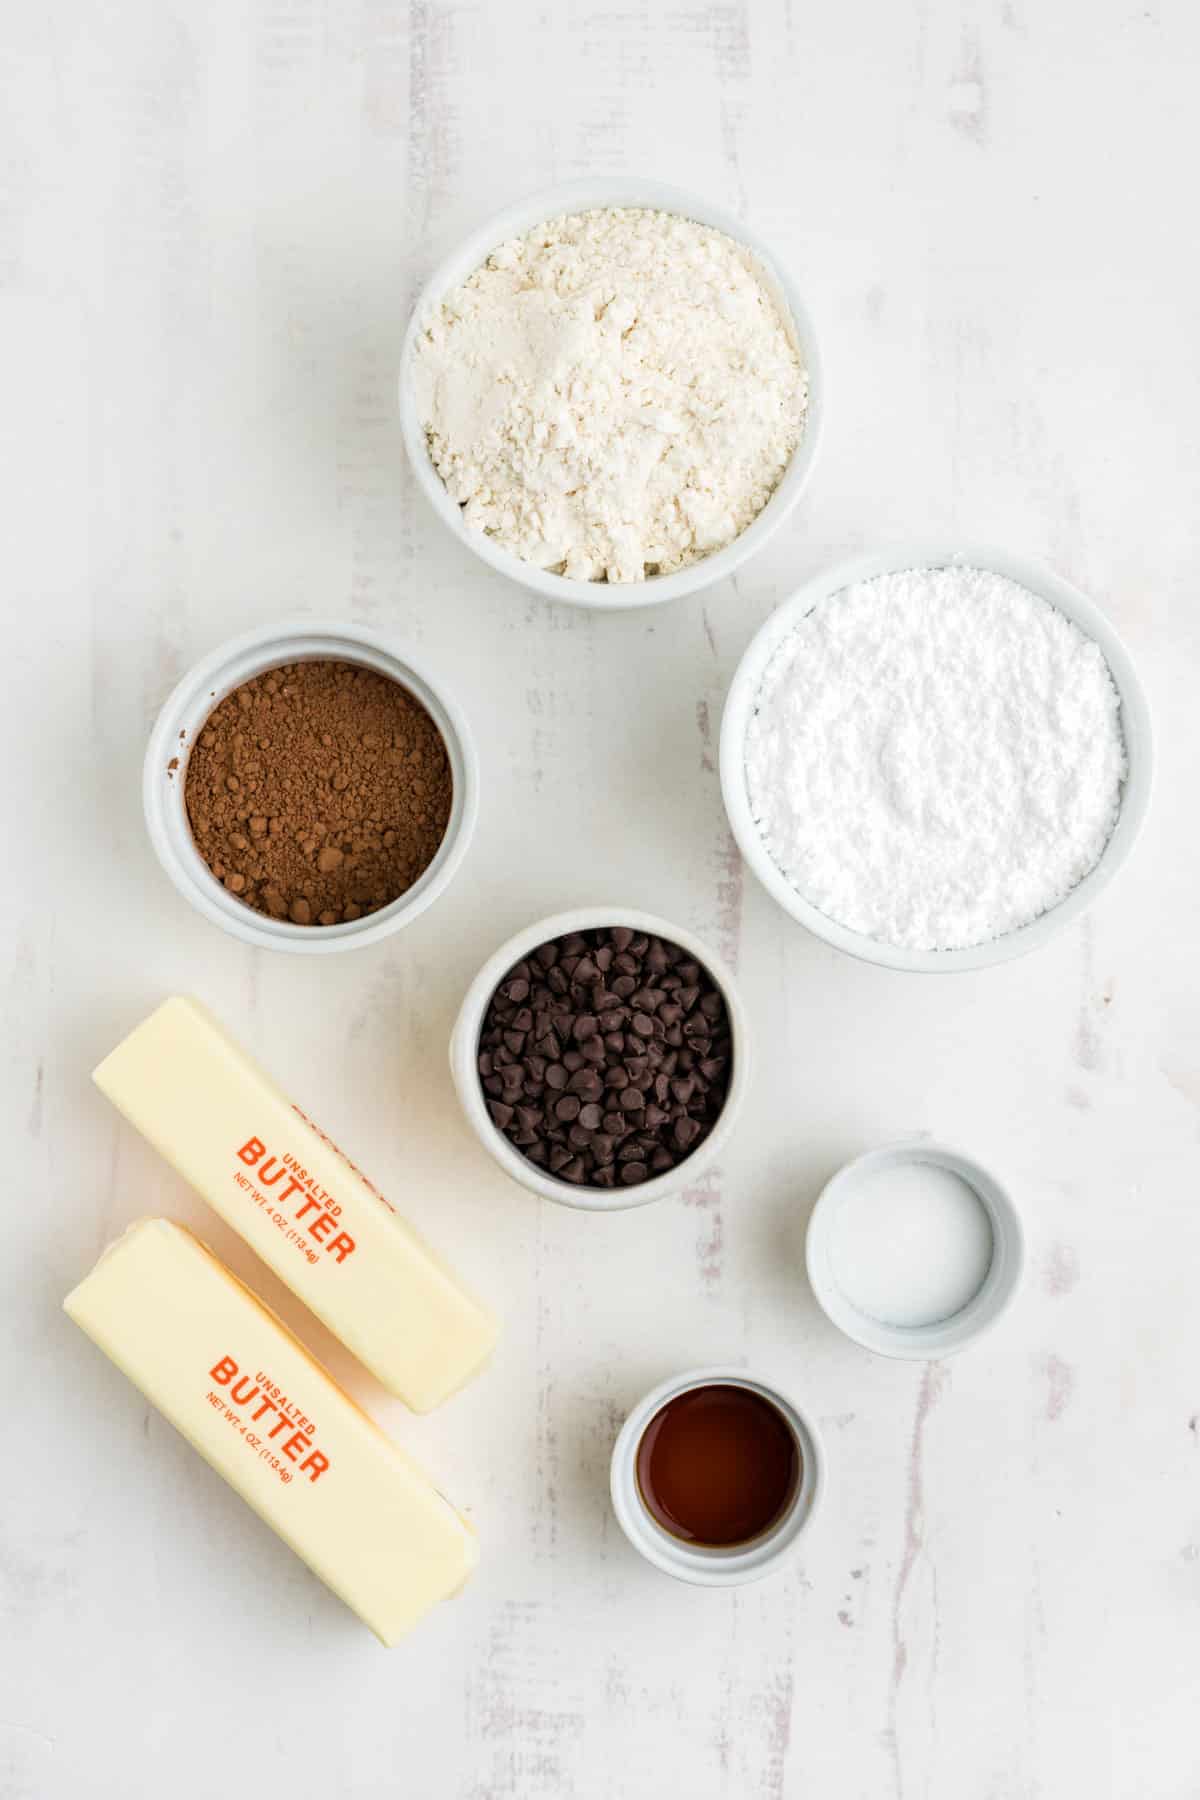 Ingredients to make chocolate snowball cookies on the table.